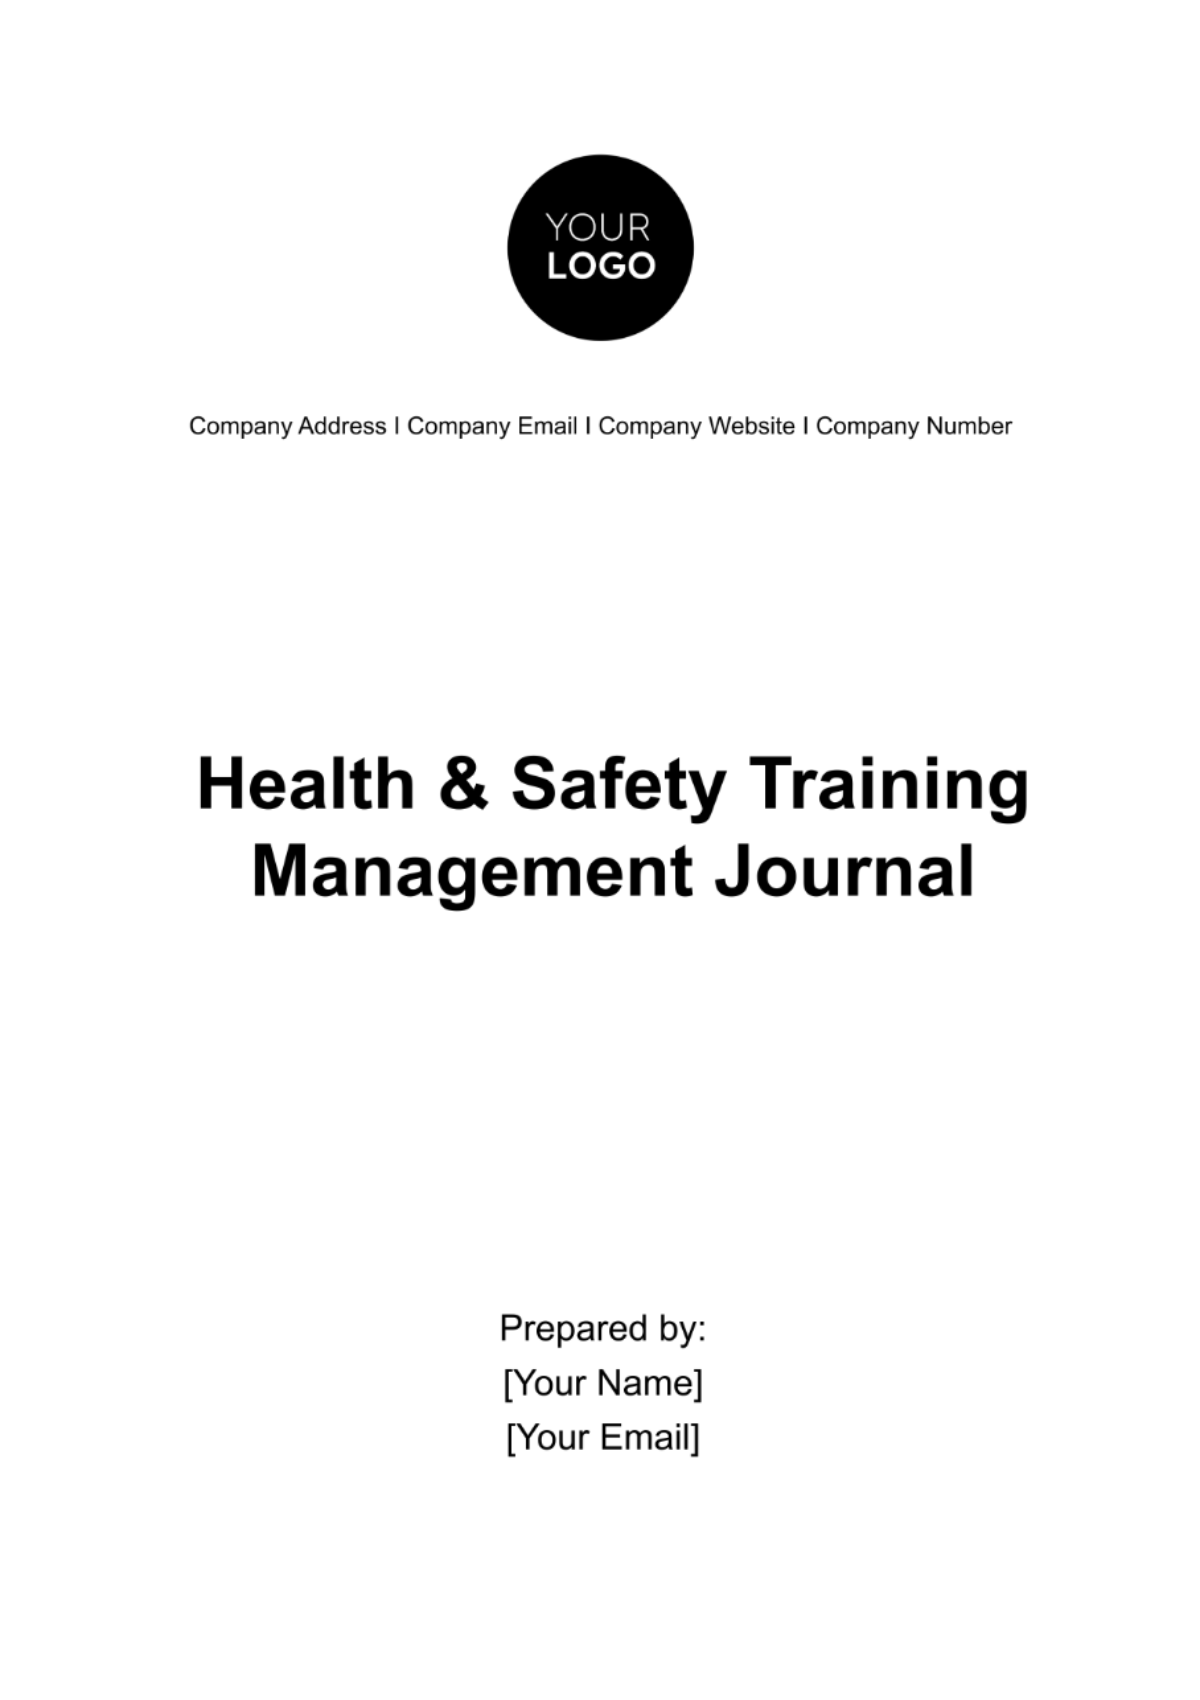 Health & Safety Training Management Journal Template